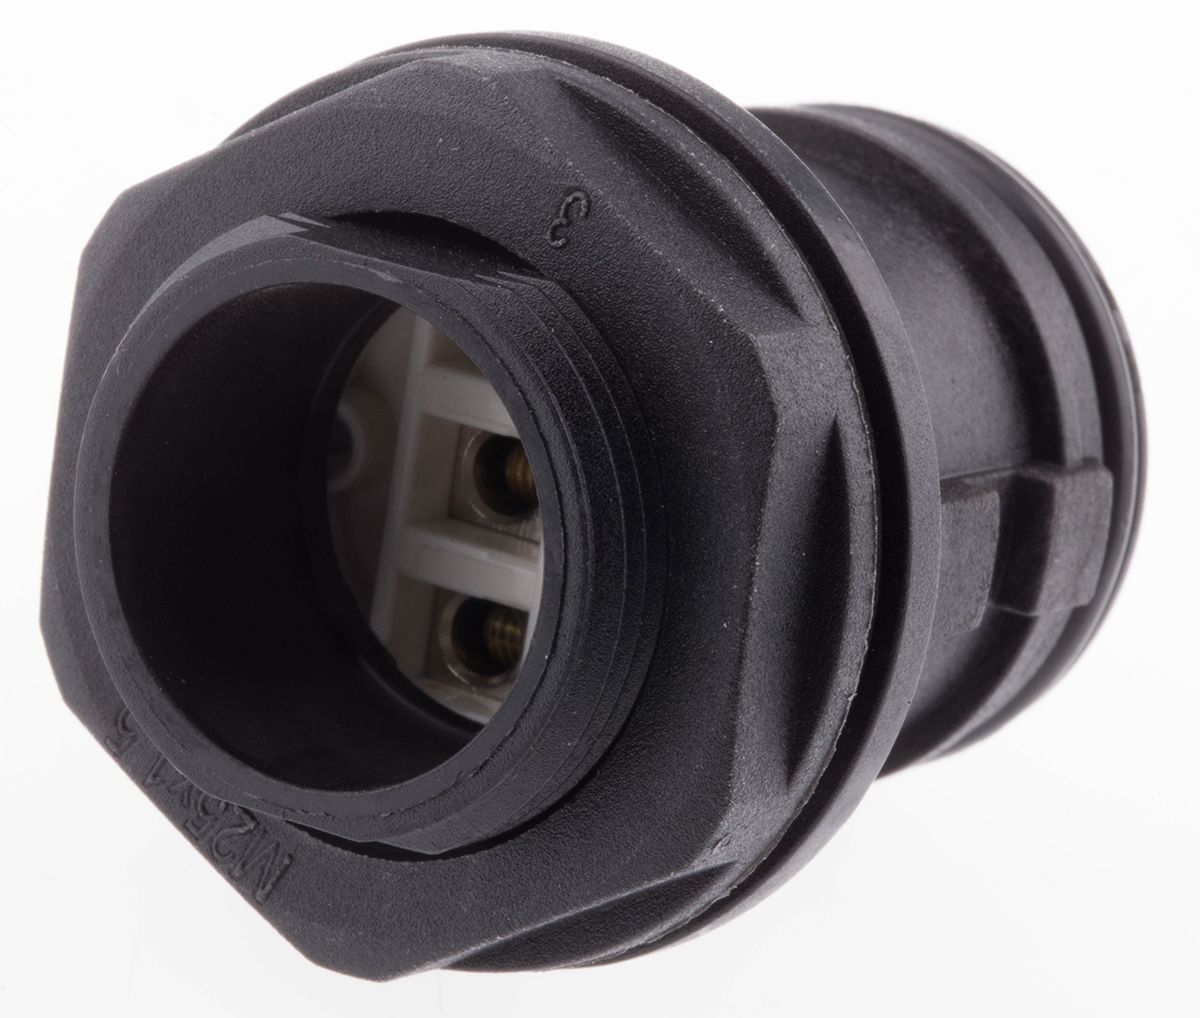 3 Pole IP68 Rating Panel Mount Female IEC Connector Rated At 16A